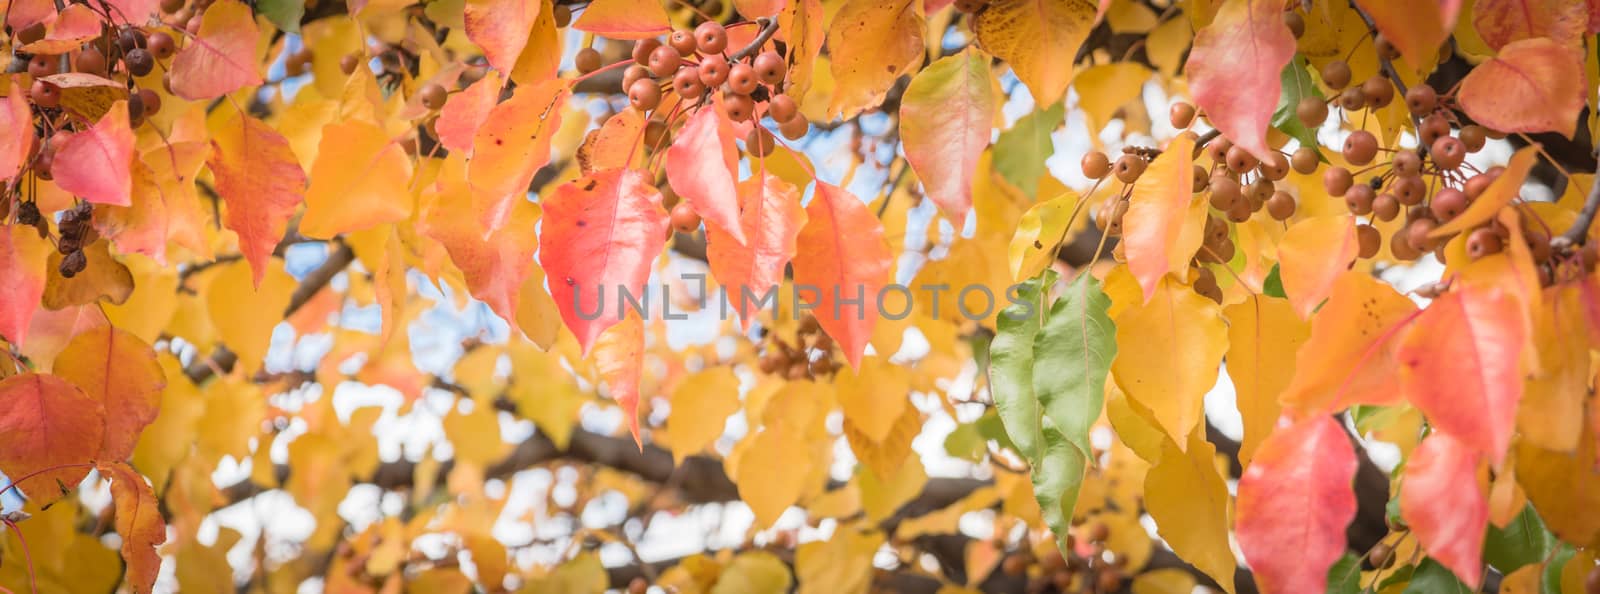 Panoramic green, orange, yellow, red fall leaves color of Bradford pear or Pyrus calleryana tree by trongnguyen